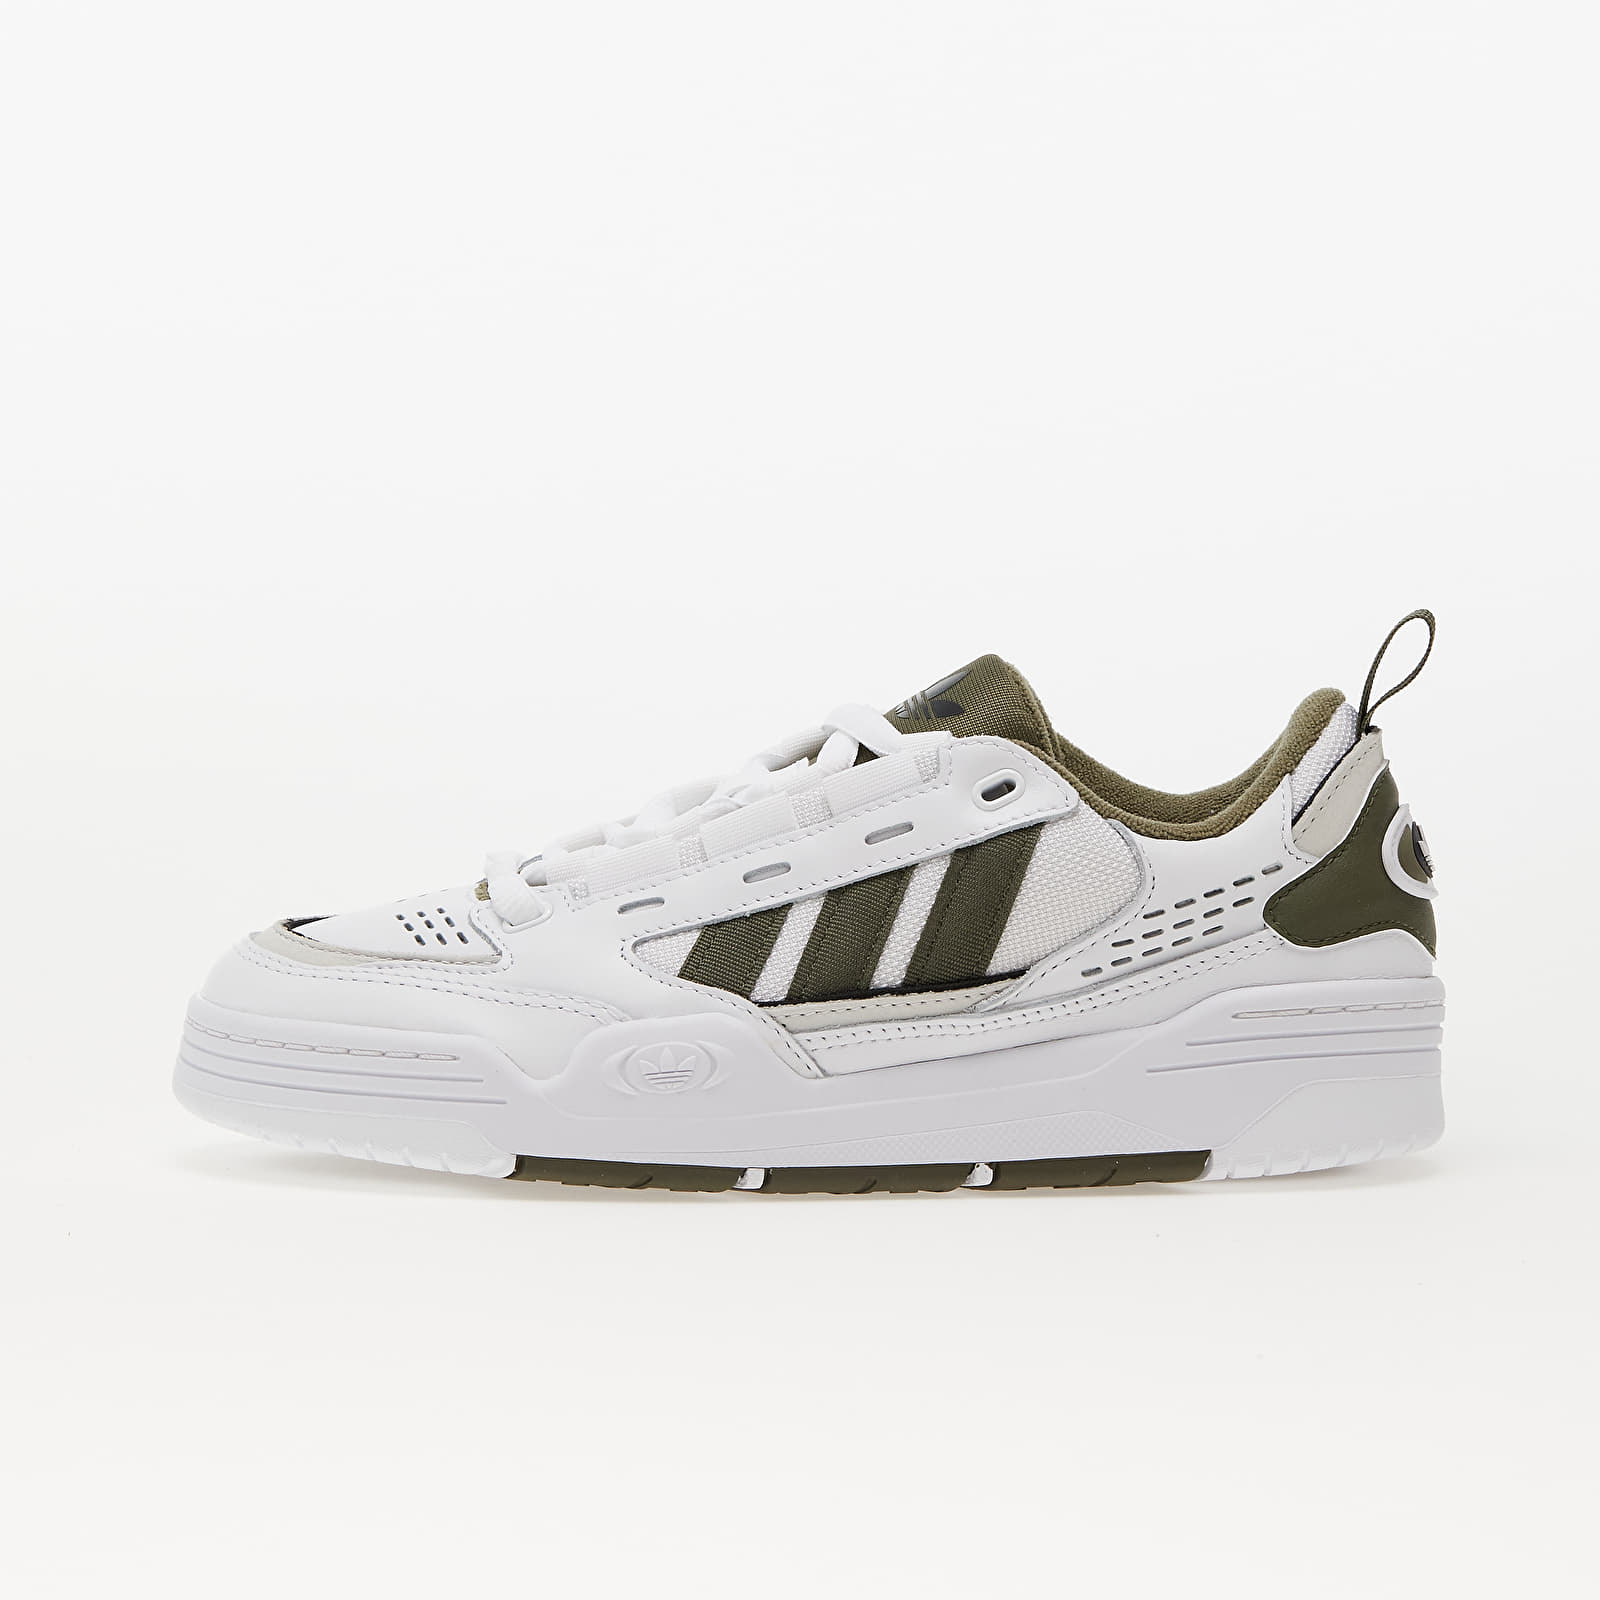 Men's shoes adidas Adi2000 Ftw White/ Clear Pink/ Core Black